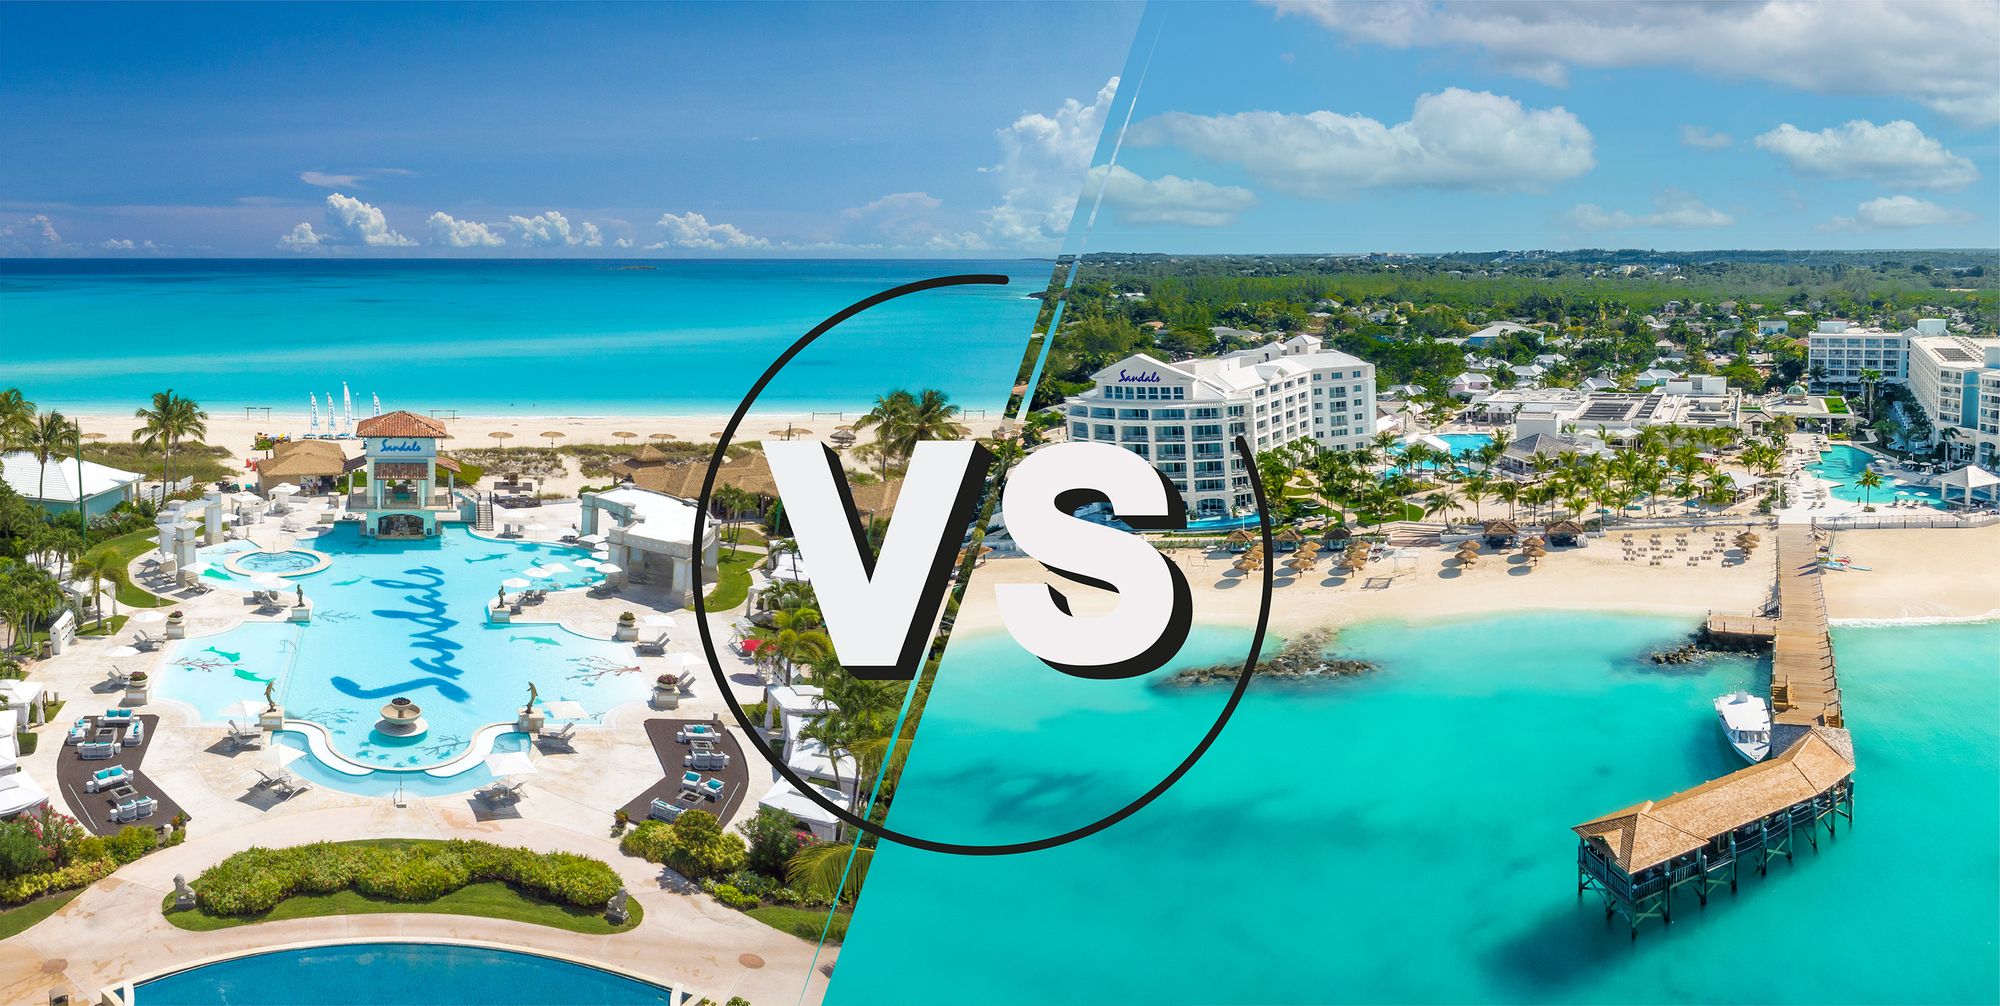 Sandals Royal Bahamian vs Sandals Emerald Bay: Which Sandals Resort In The Bahamas Is Best For You?